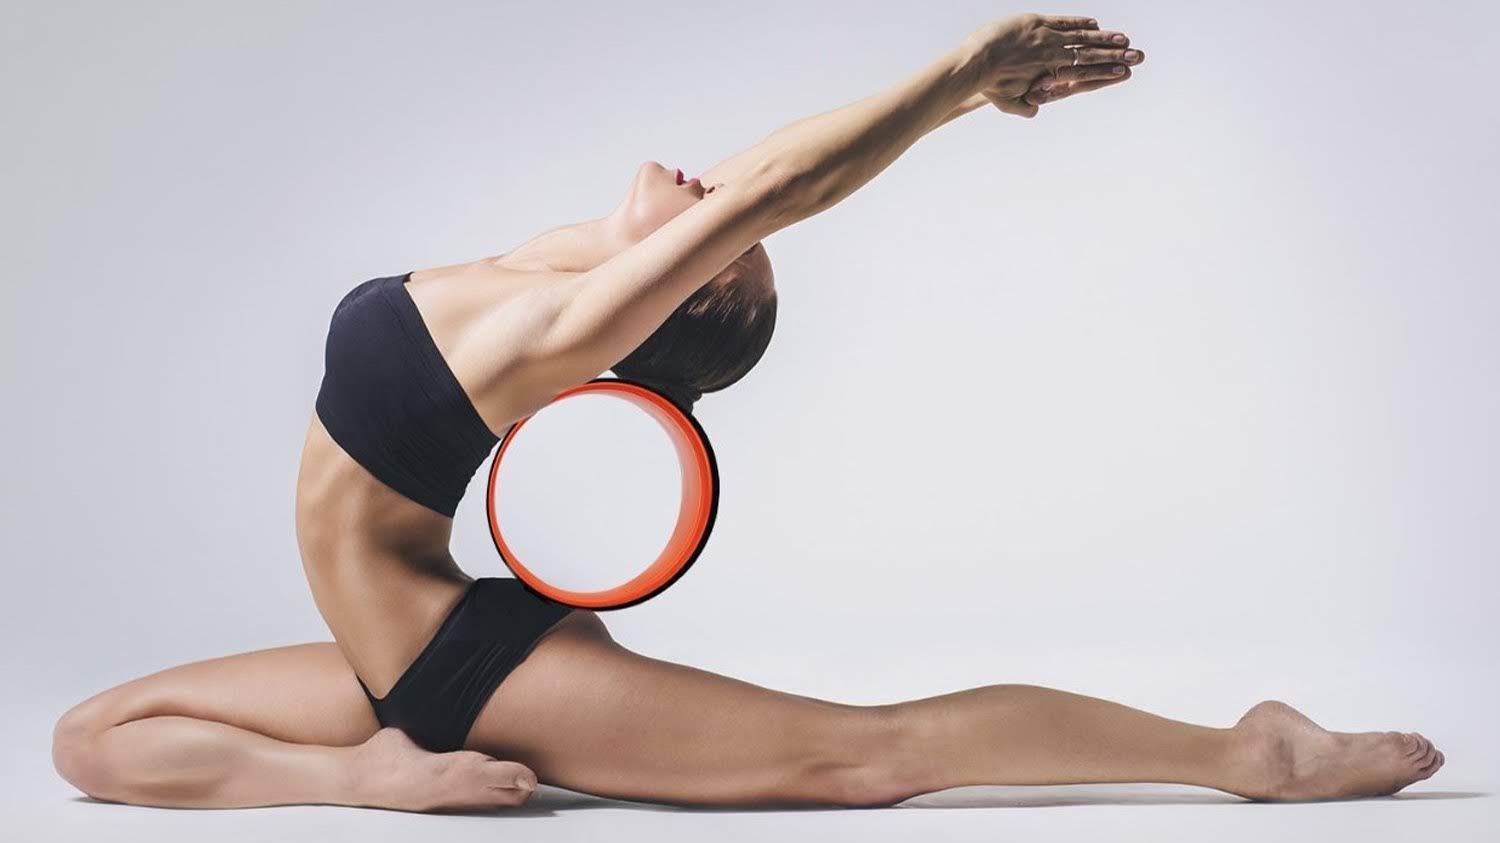 New Prop on the Block: 5 Things to Know About the Yoga Wheel